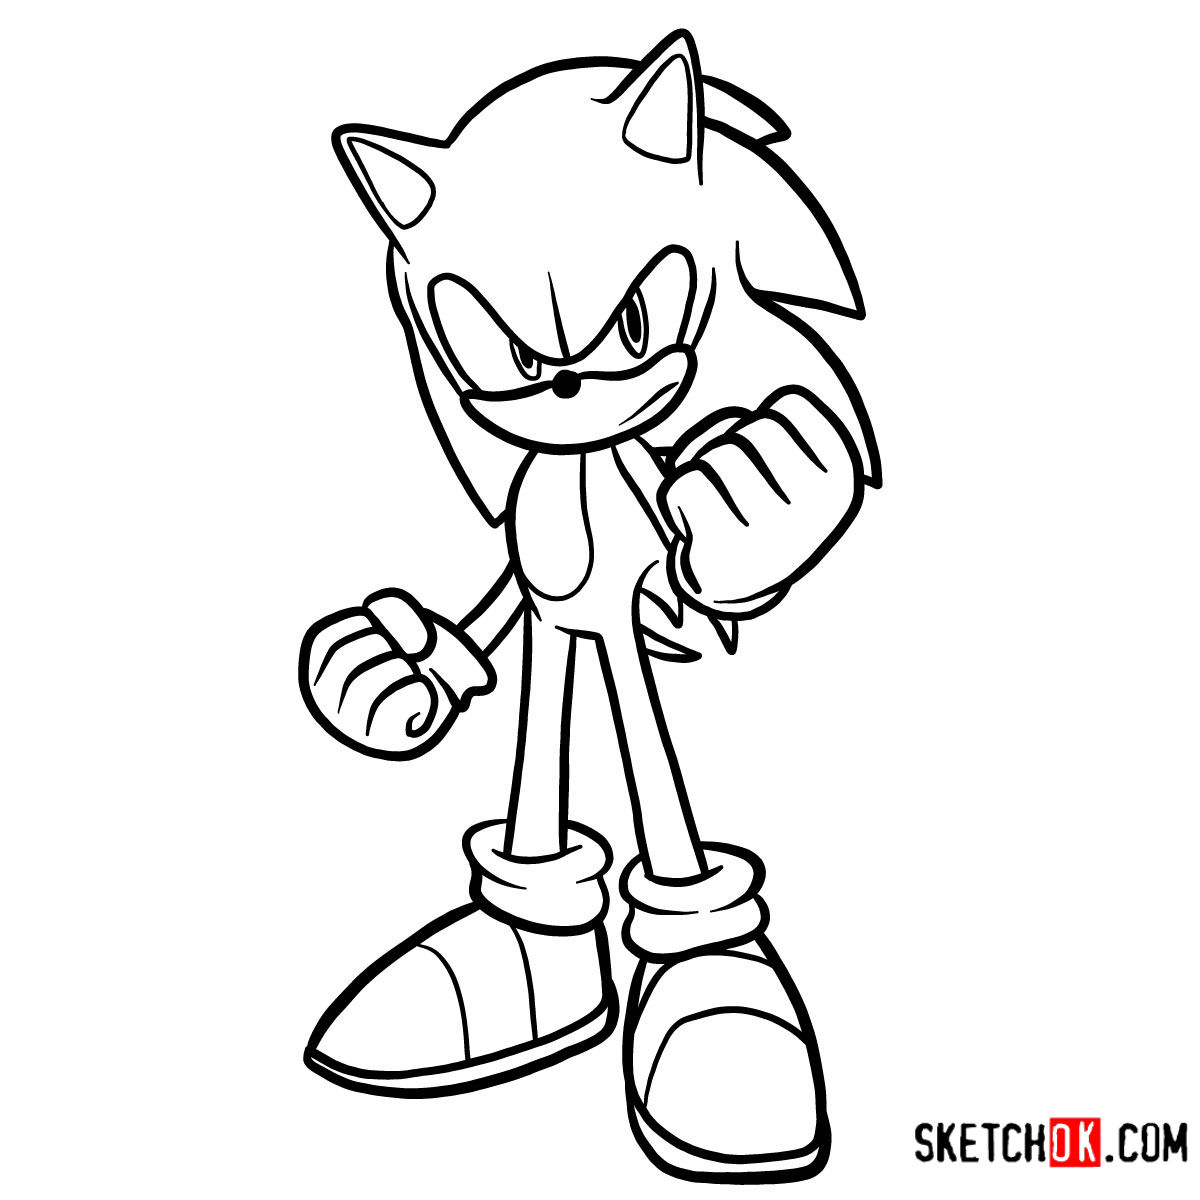 How to Draw SONIC (Sonic the Hedgehog) Drawing Tutorial - Draw it, Too!